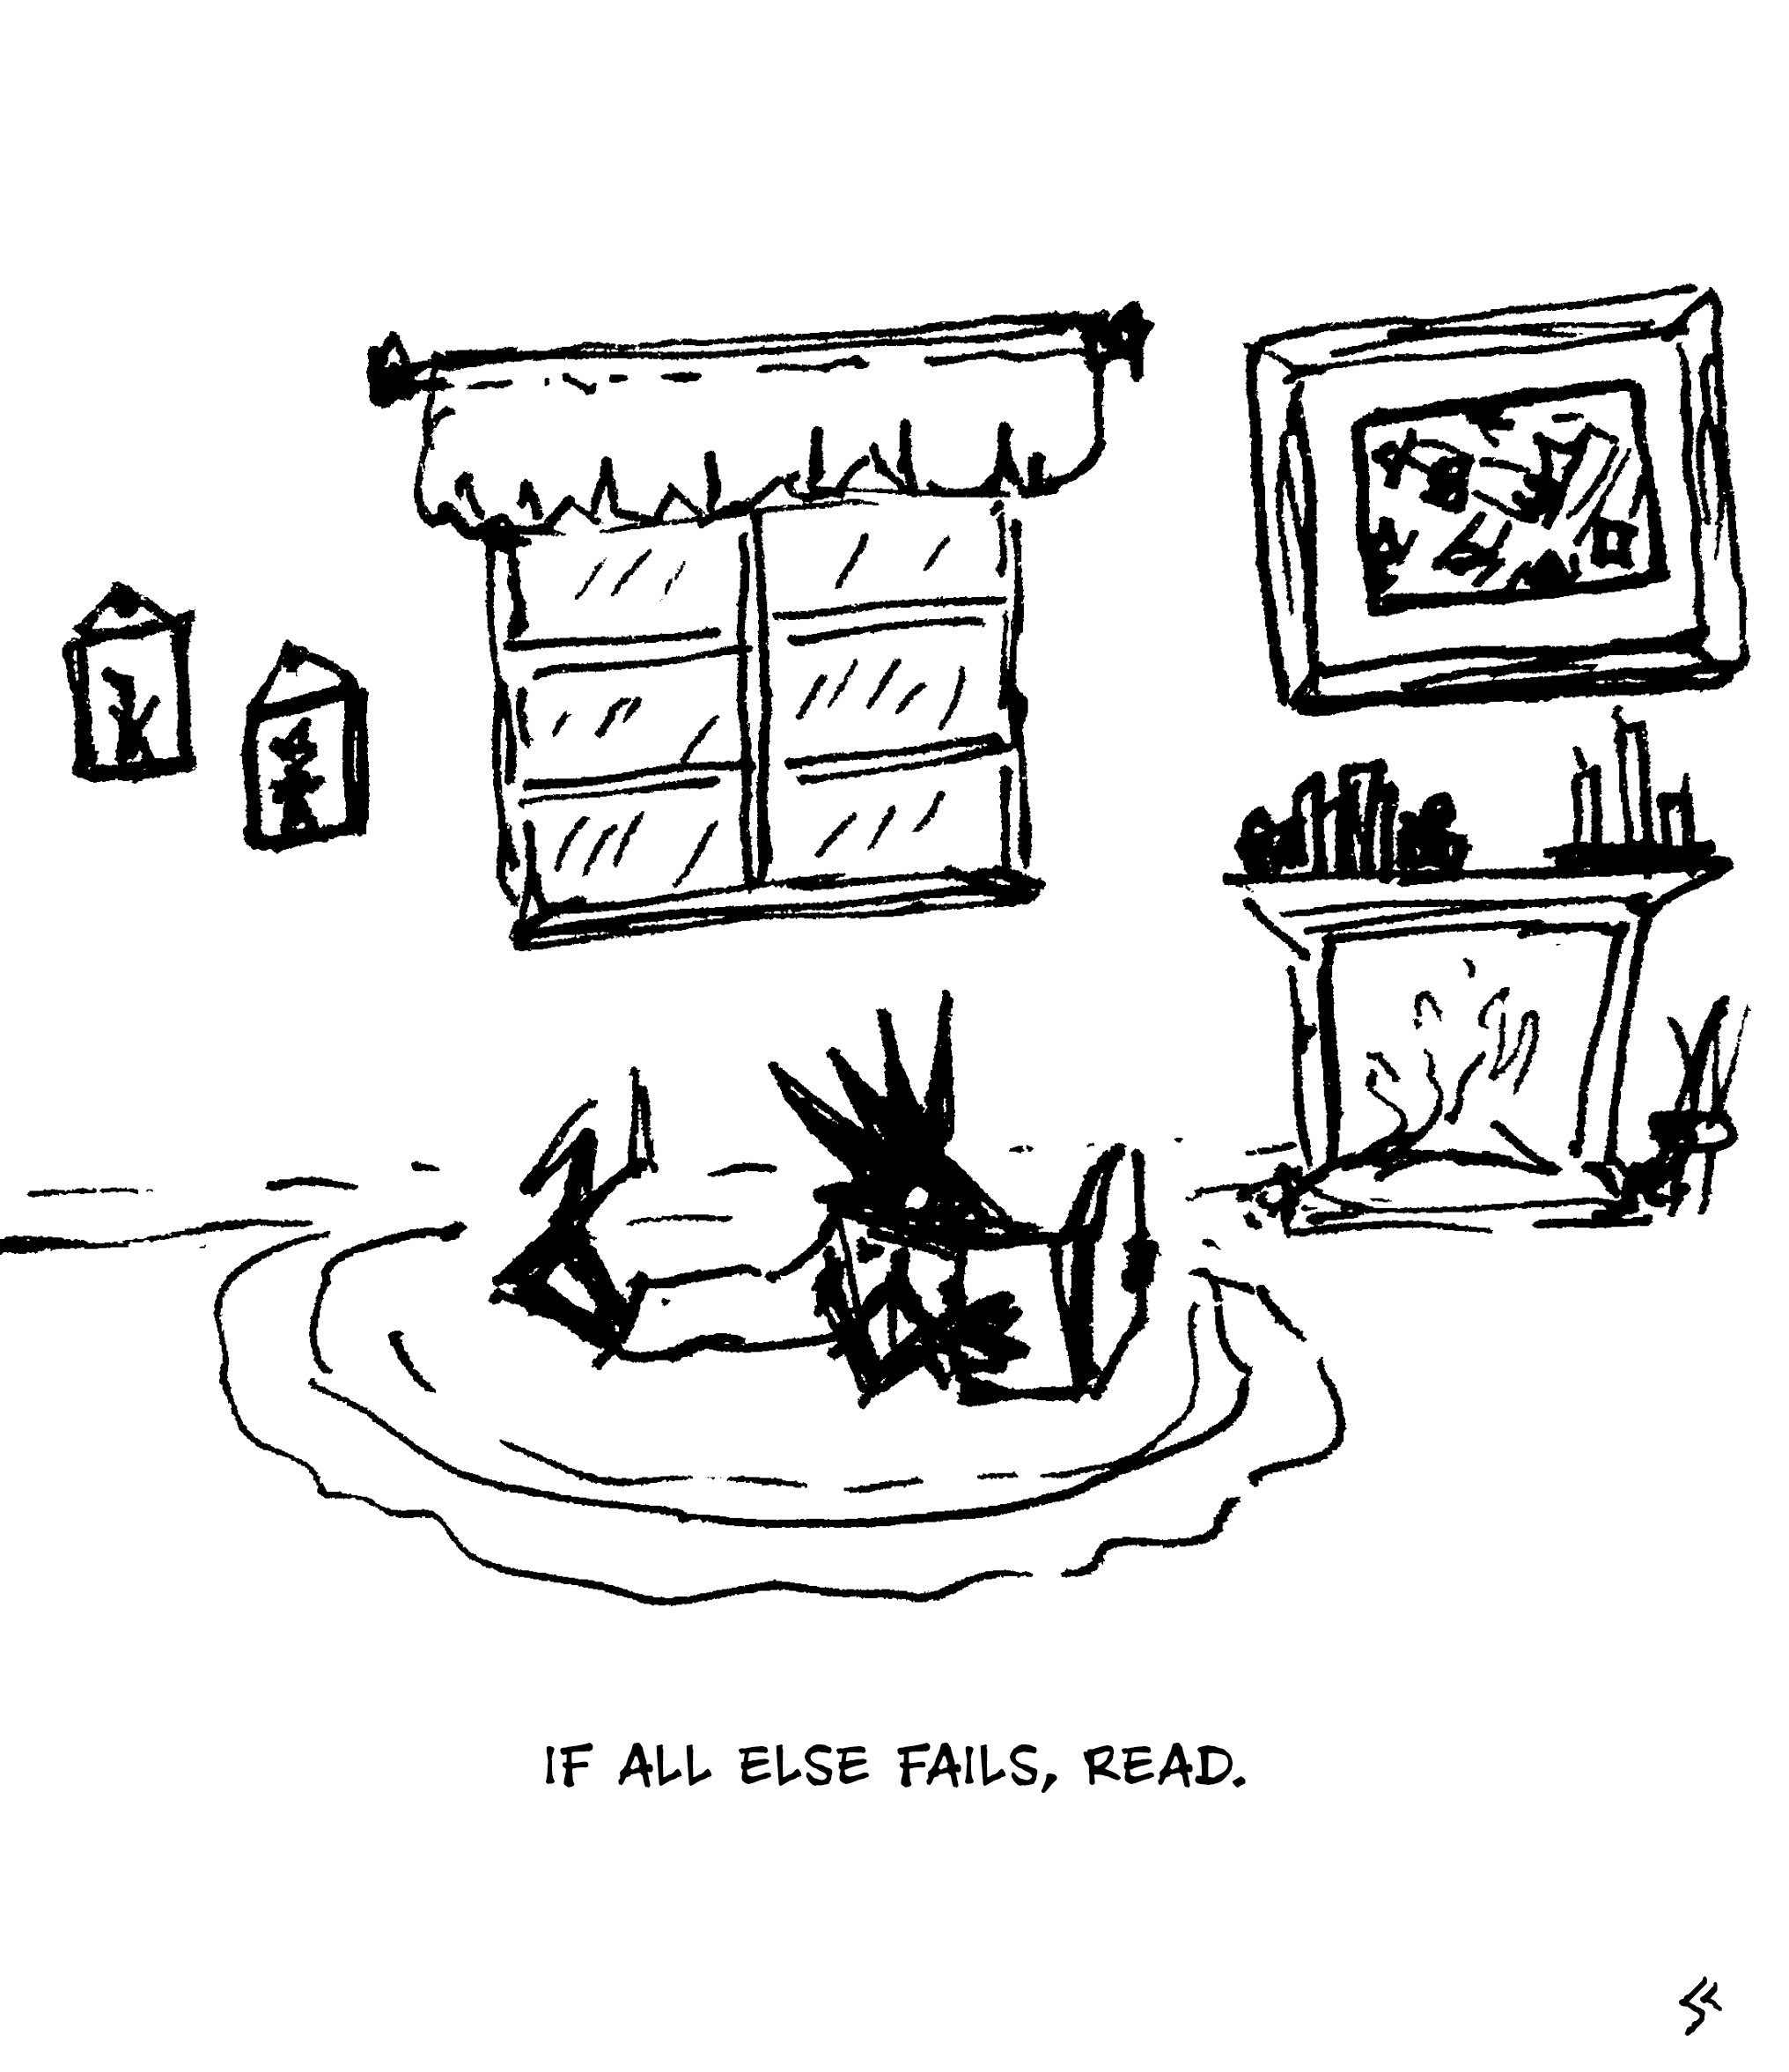 Crow is reading on a rug in front of a fireplace, while it rains outside